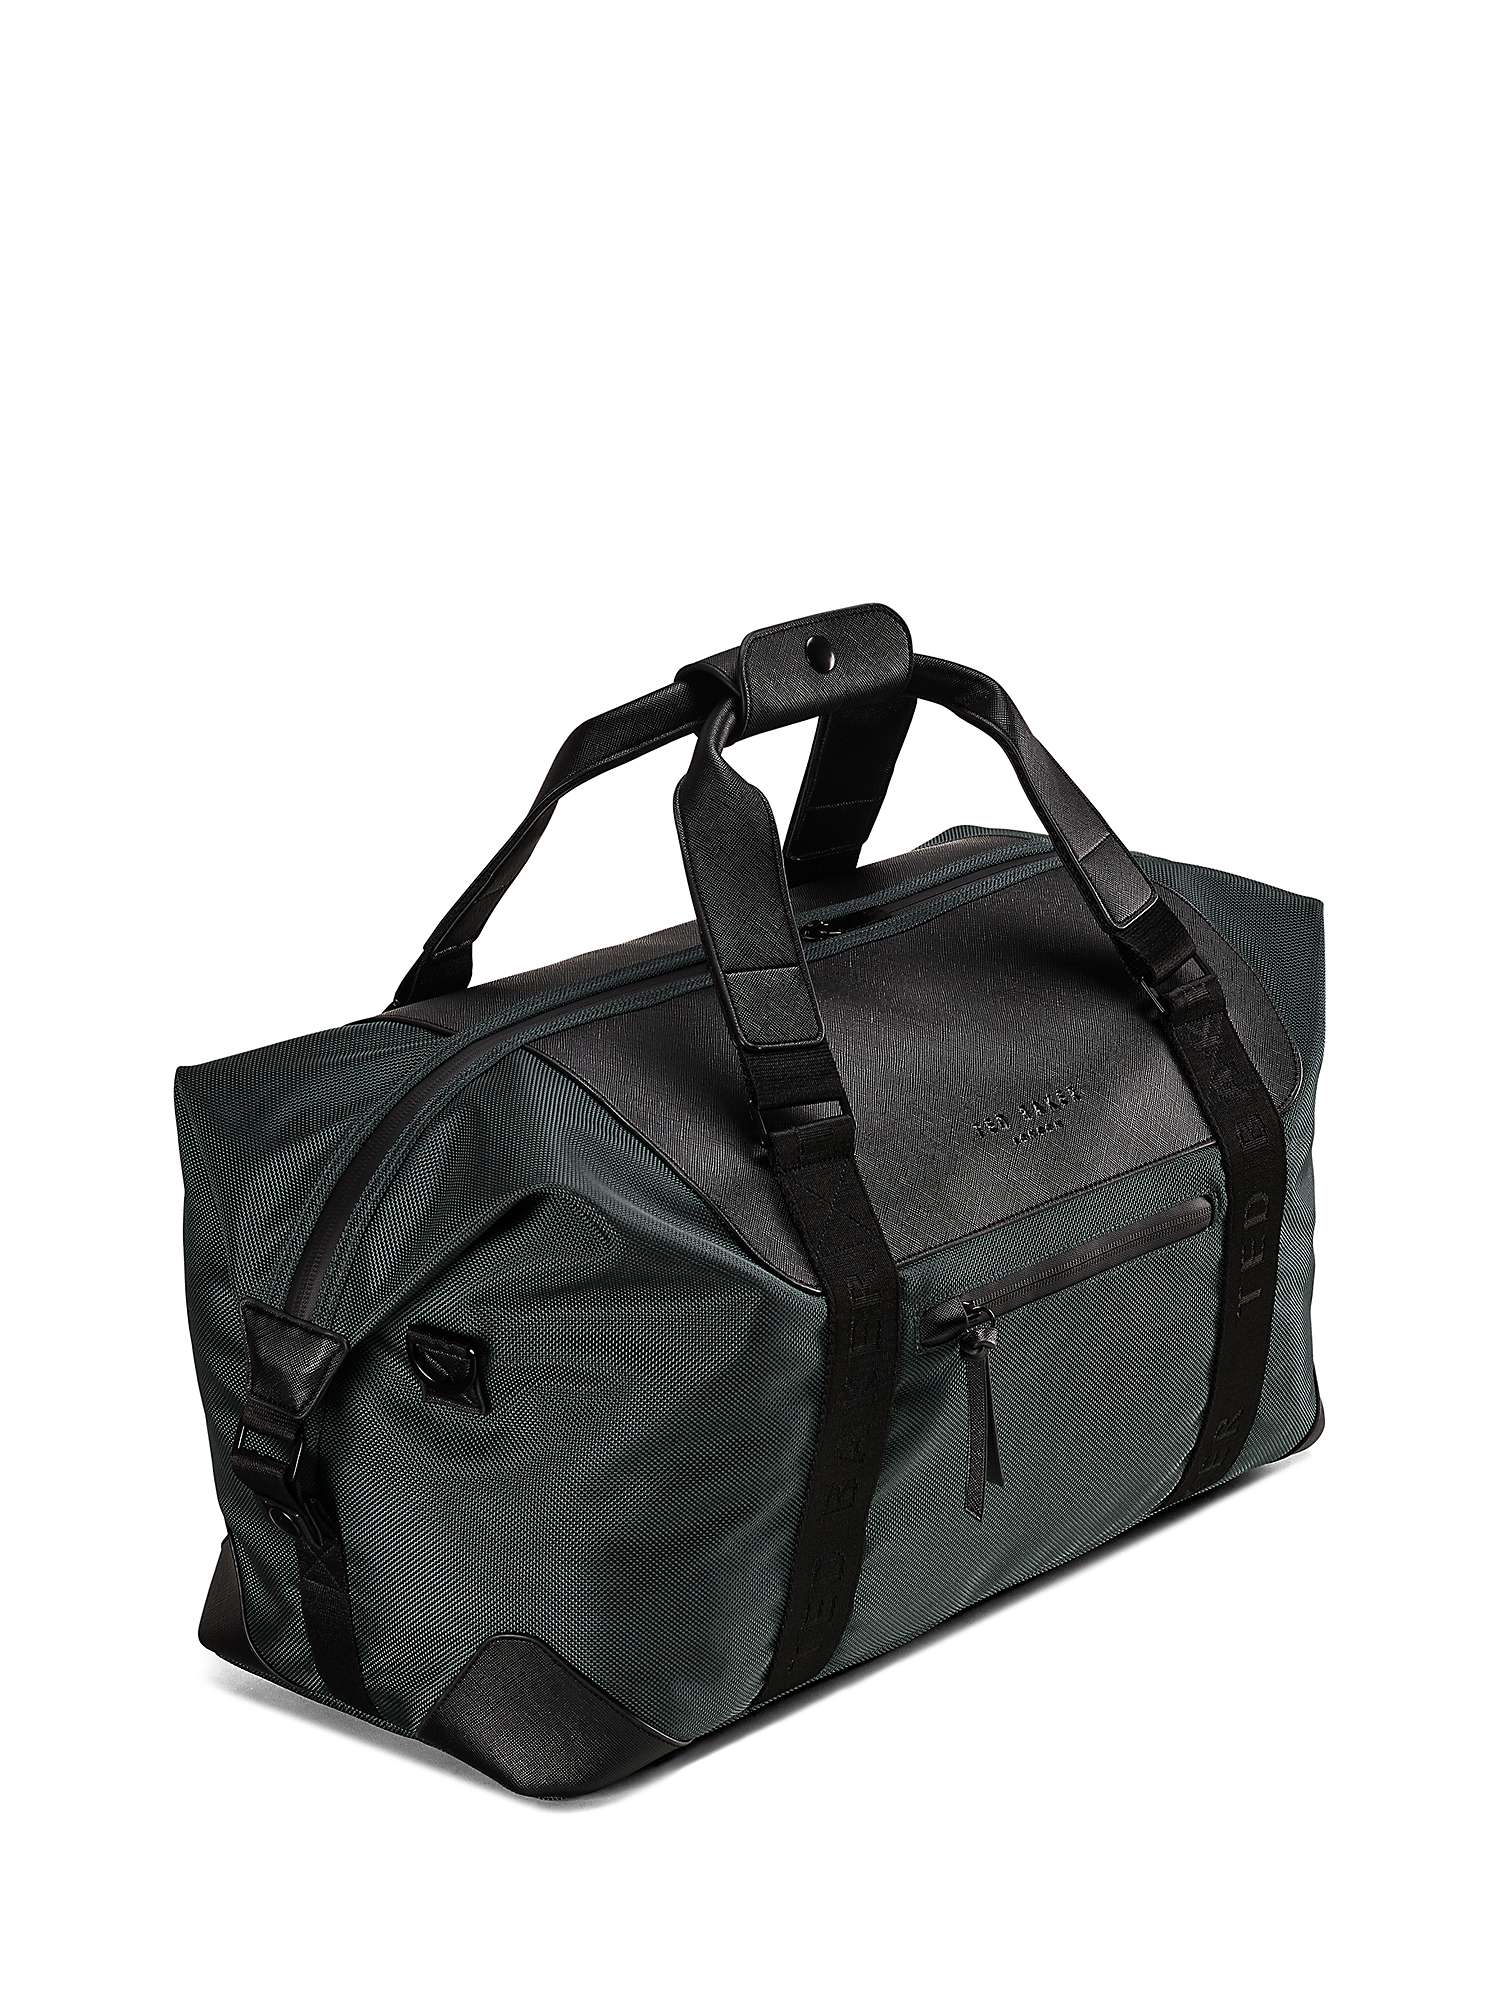 Ted Baker Nomad Small Duffle Bag, 24L, Pewter Grey at John Lewis & Partners